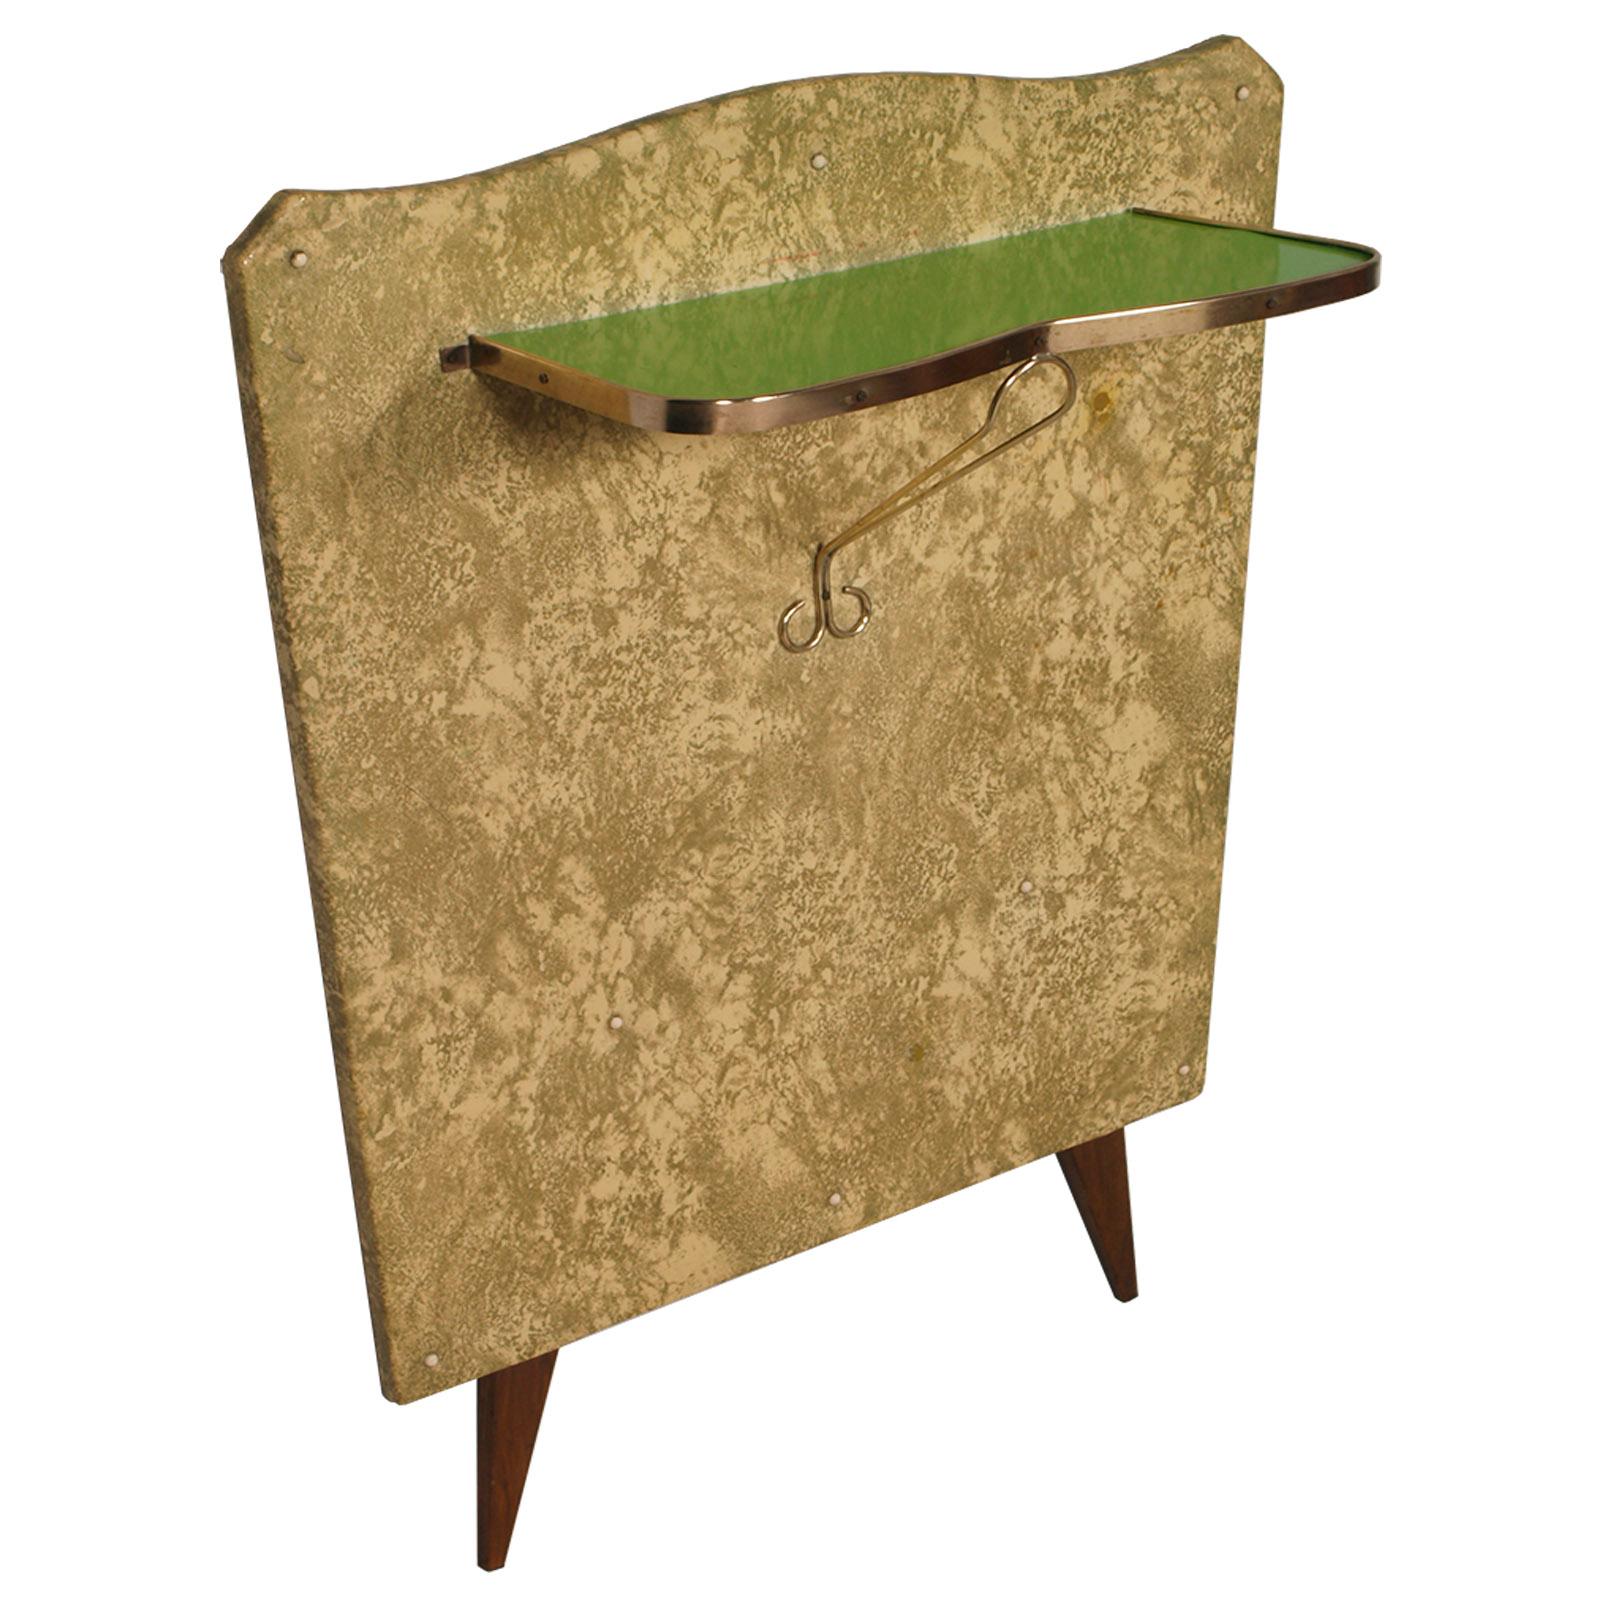 1950s console in gilded brass and plasticized fabric by Brugnoli Mobili Cantù, Pier Luigi Colli manner, green lacquered glass top. Simple and elegant essential design.